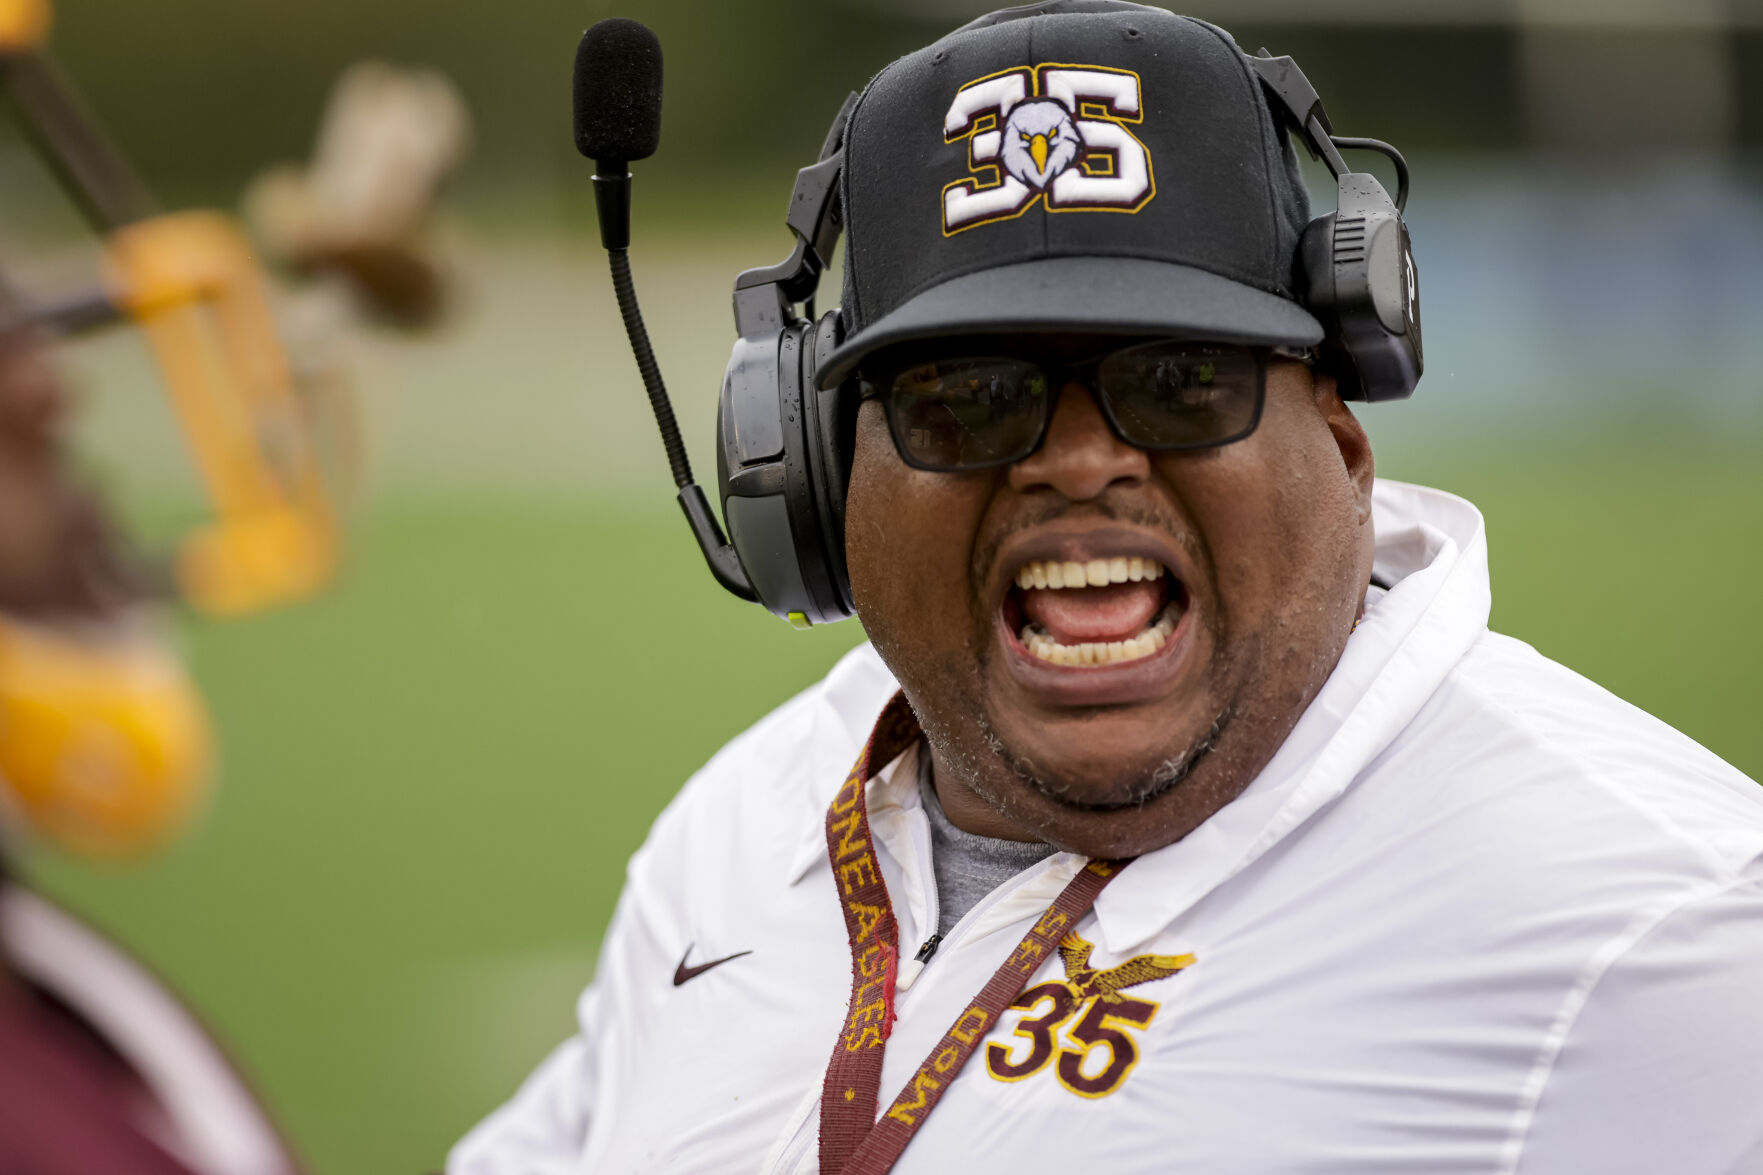 McDonogh 35 Claims District 11-4A Title with Convincing 31-0 Victory over Douglass